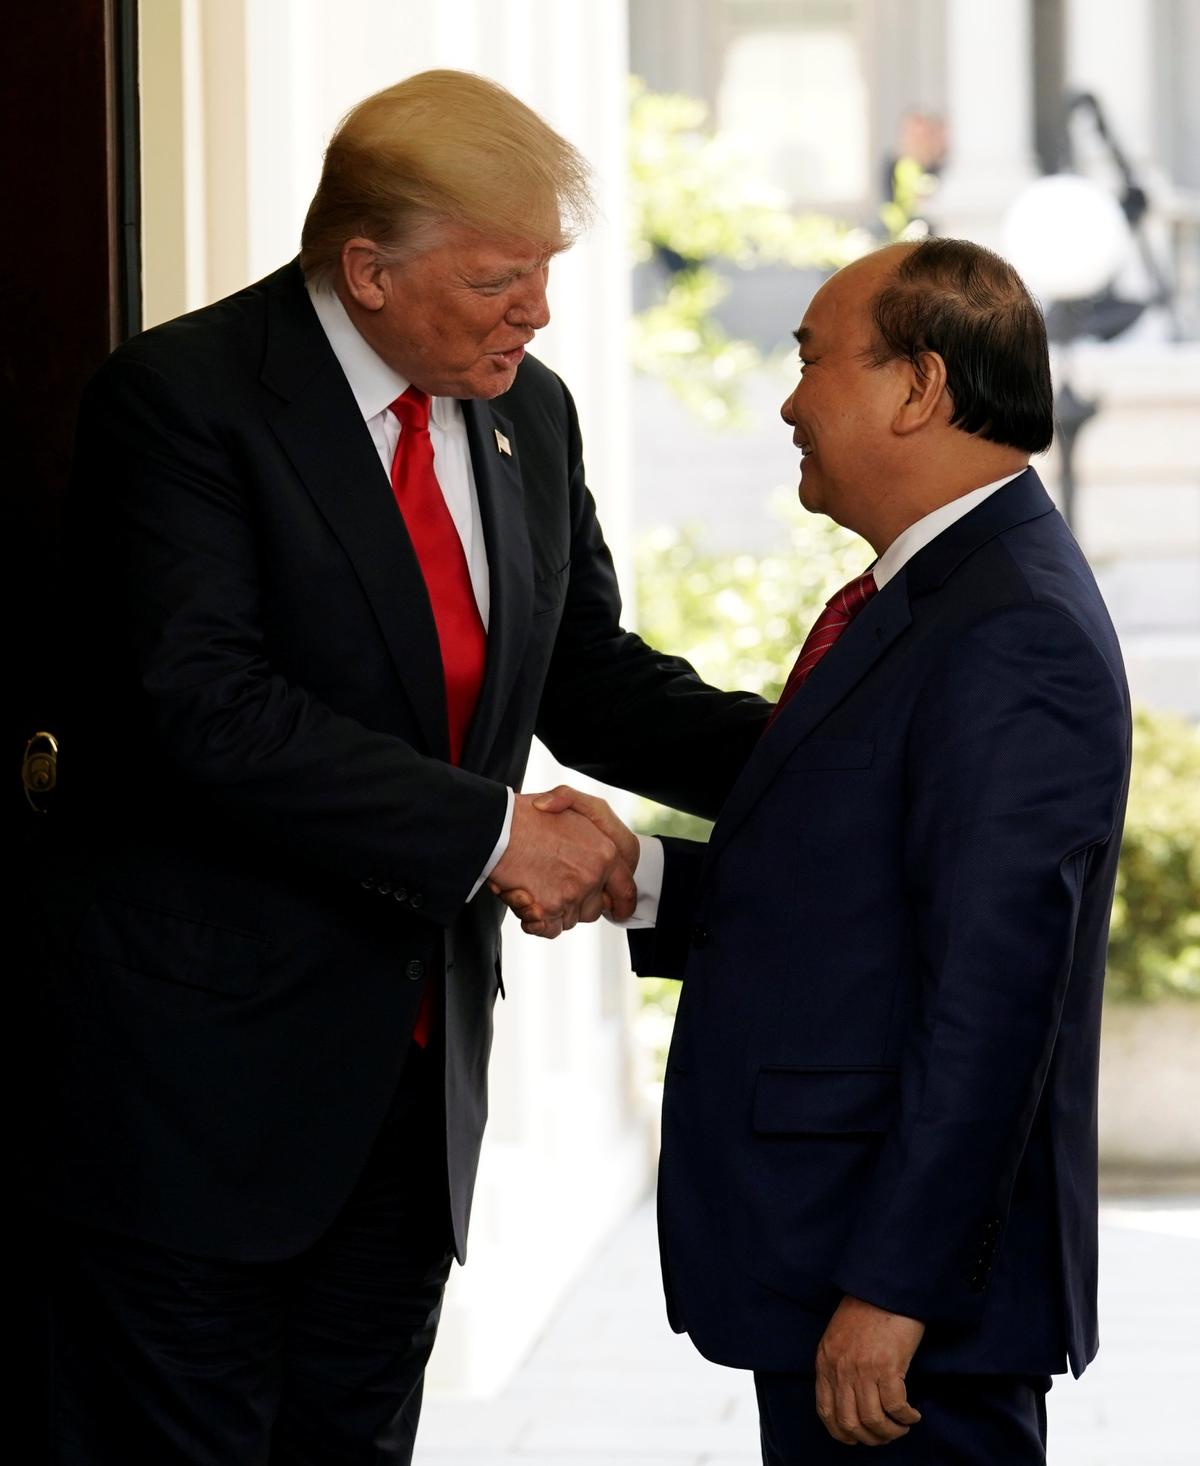 President Donald Trump greets Vietnamese Prime Minister Nguyen Xuan Phuc at the White House in Washington on May 31, 2017. (REUTERS/Kevin Lamarque)